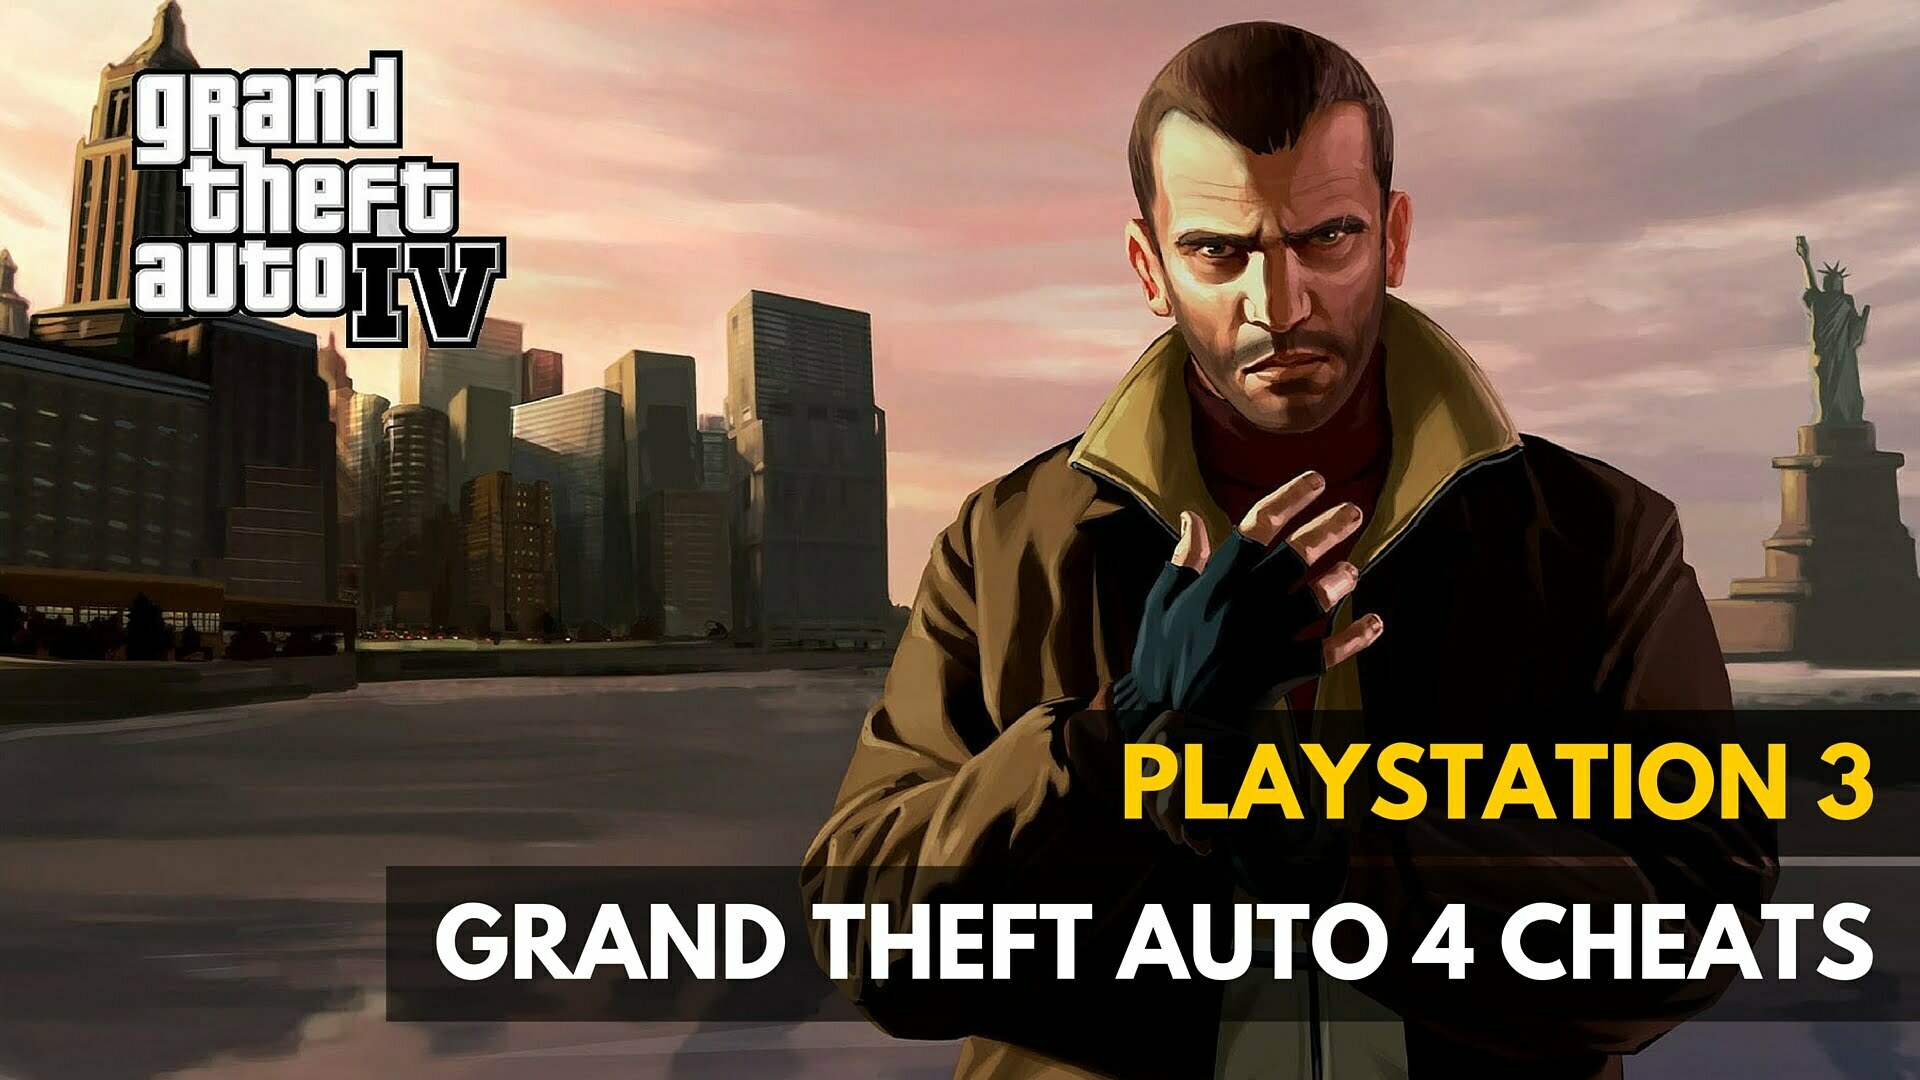 vejviser Institut vision Grand Theft Auto 4 Cheats For Playstation 3 - Gadget Review